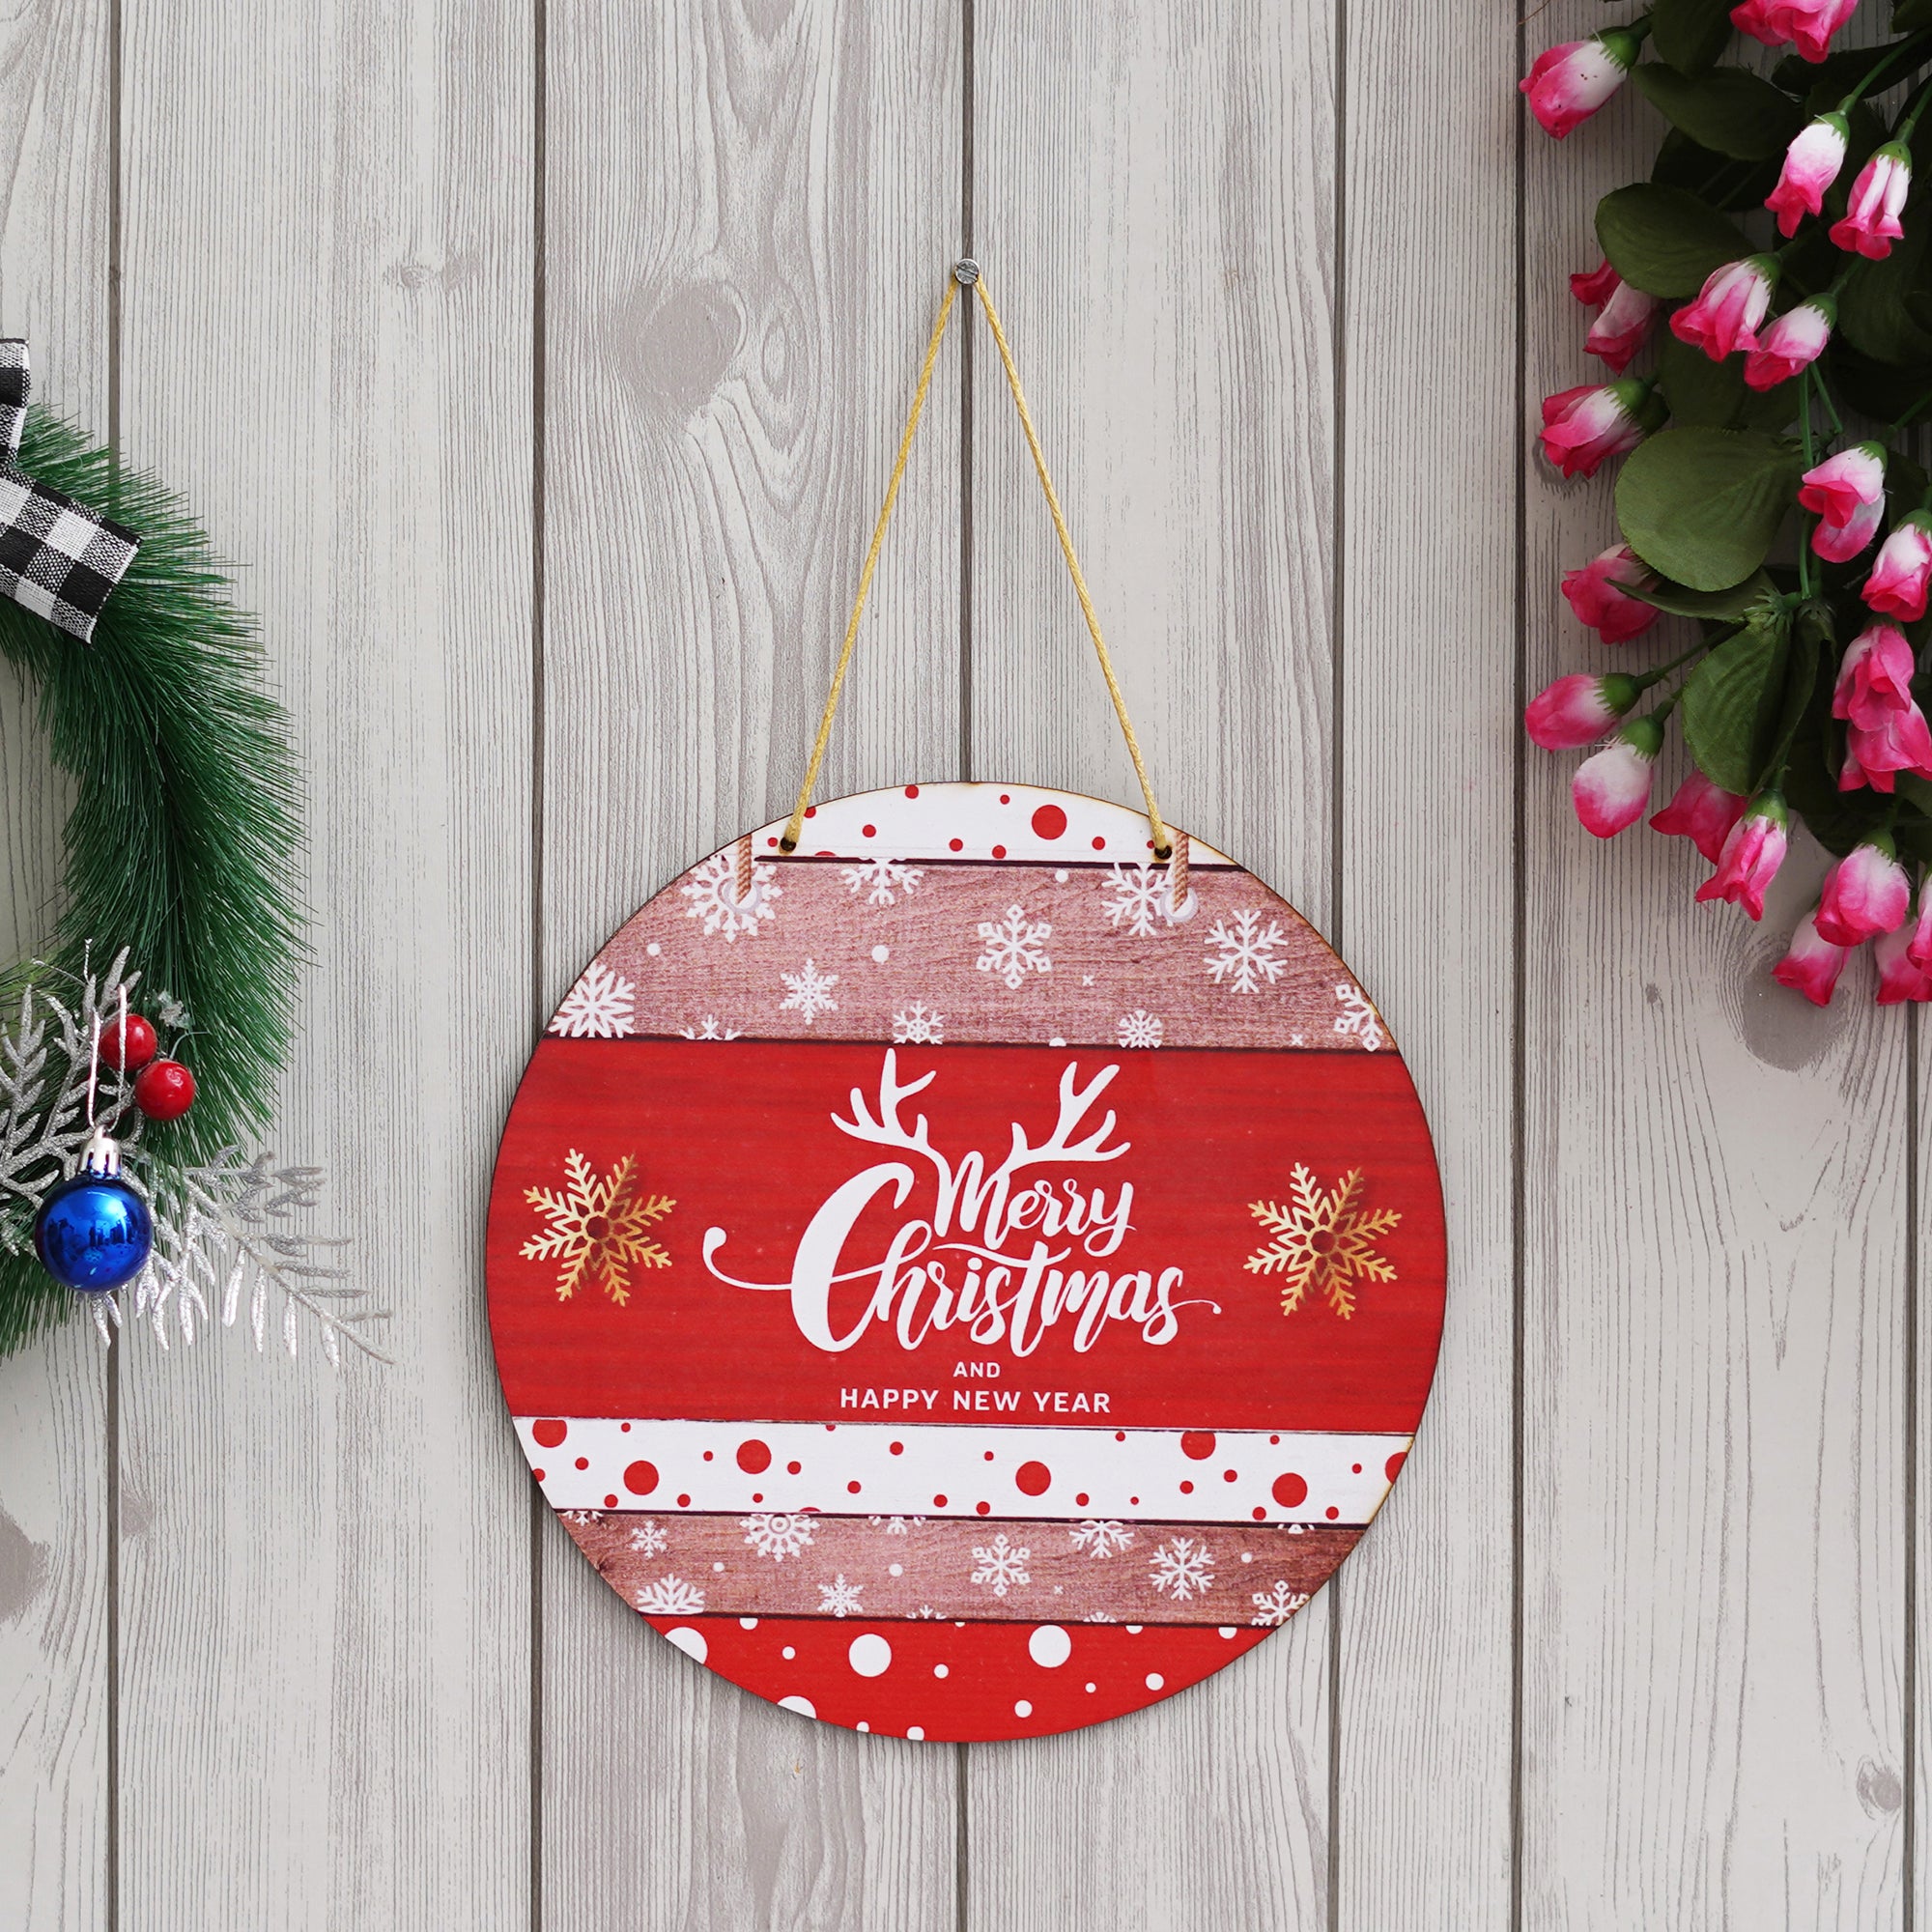 eCraftIndia "Merry Christmas and Happy New Year" Printed Wooden Door Wall Hanging for Home and Christmas Tree Decorations (Red, White, Golden) 1